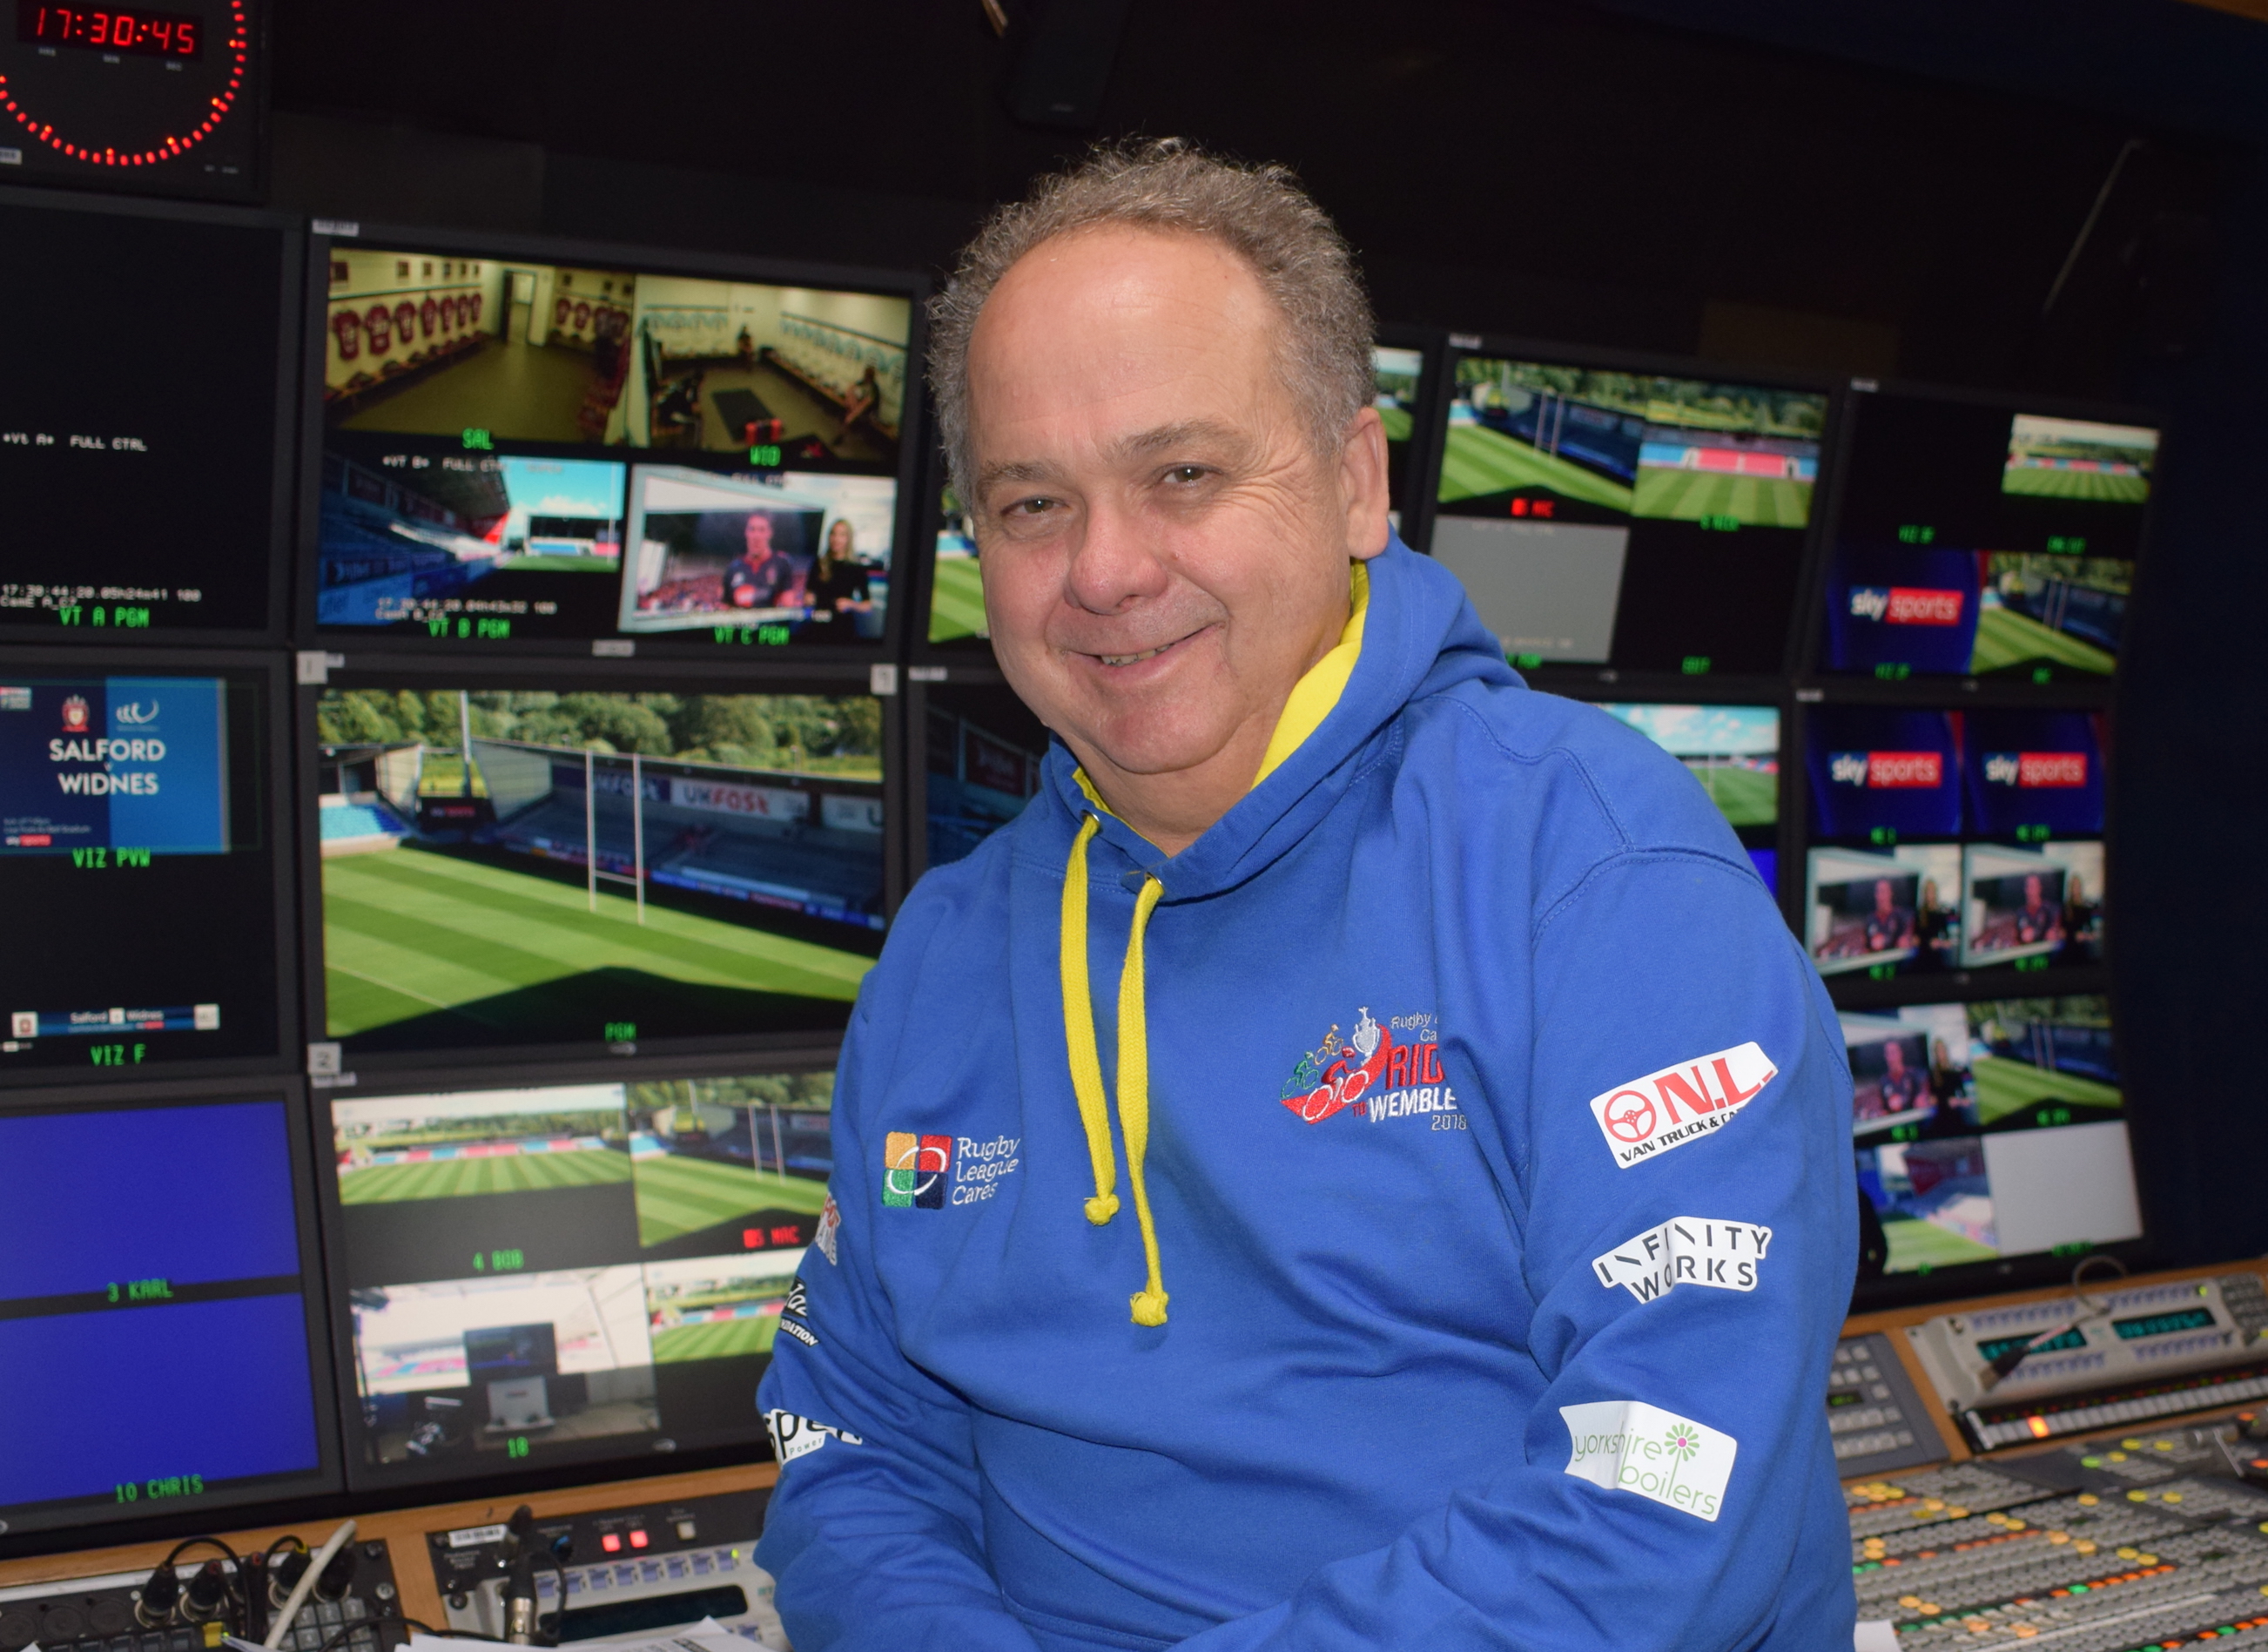 Sky Sports Rugby League supremo joins the Ride to Wembley